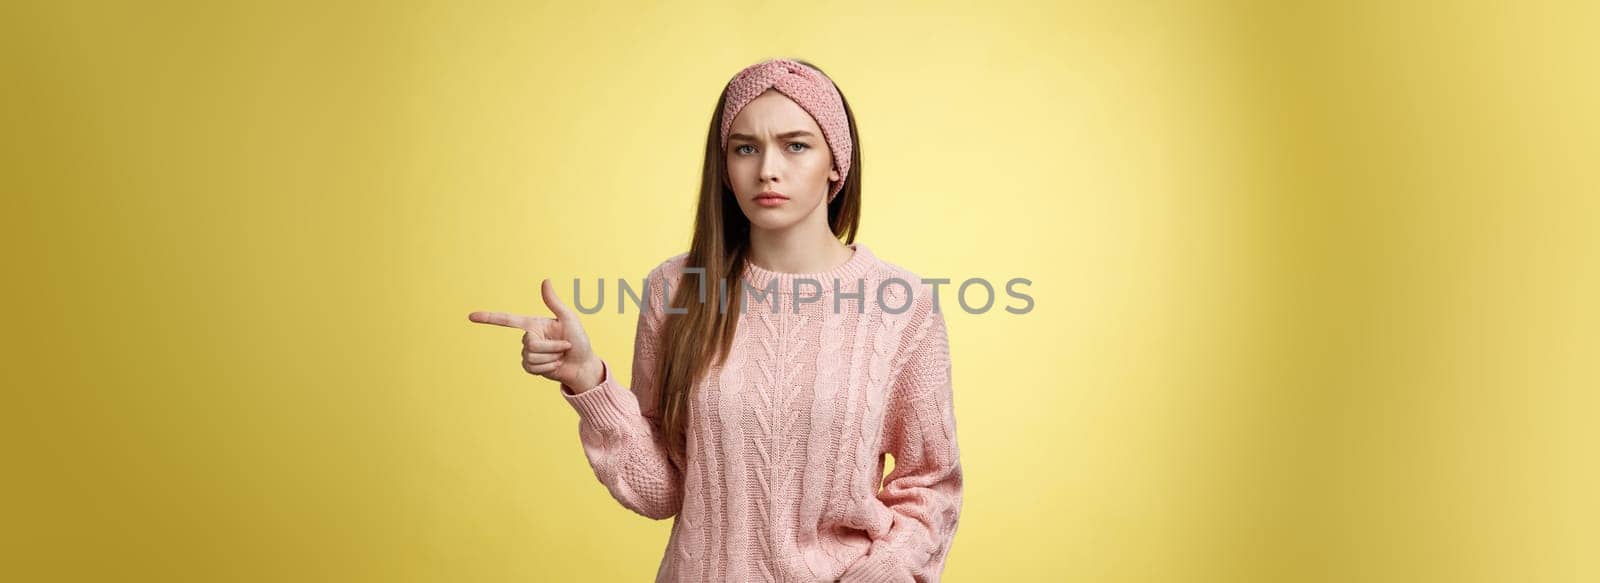 Pissed puzzled young attractive arrogant moody girlfriend in sweater, headband looking irritated, intense frowning pointing finger at copy space, directing person sits on her place, annoyed.